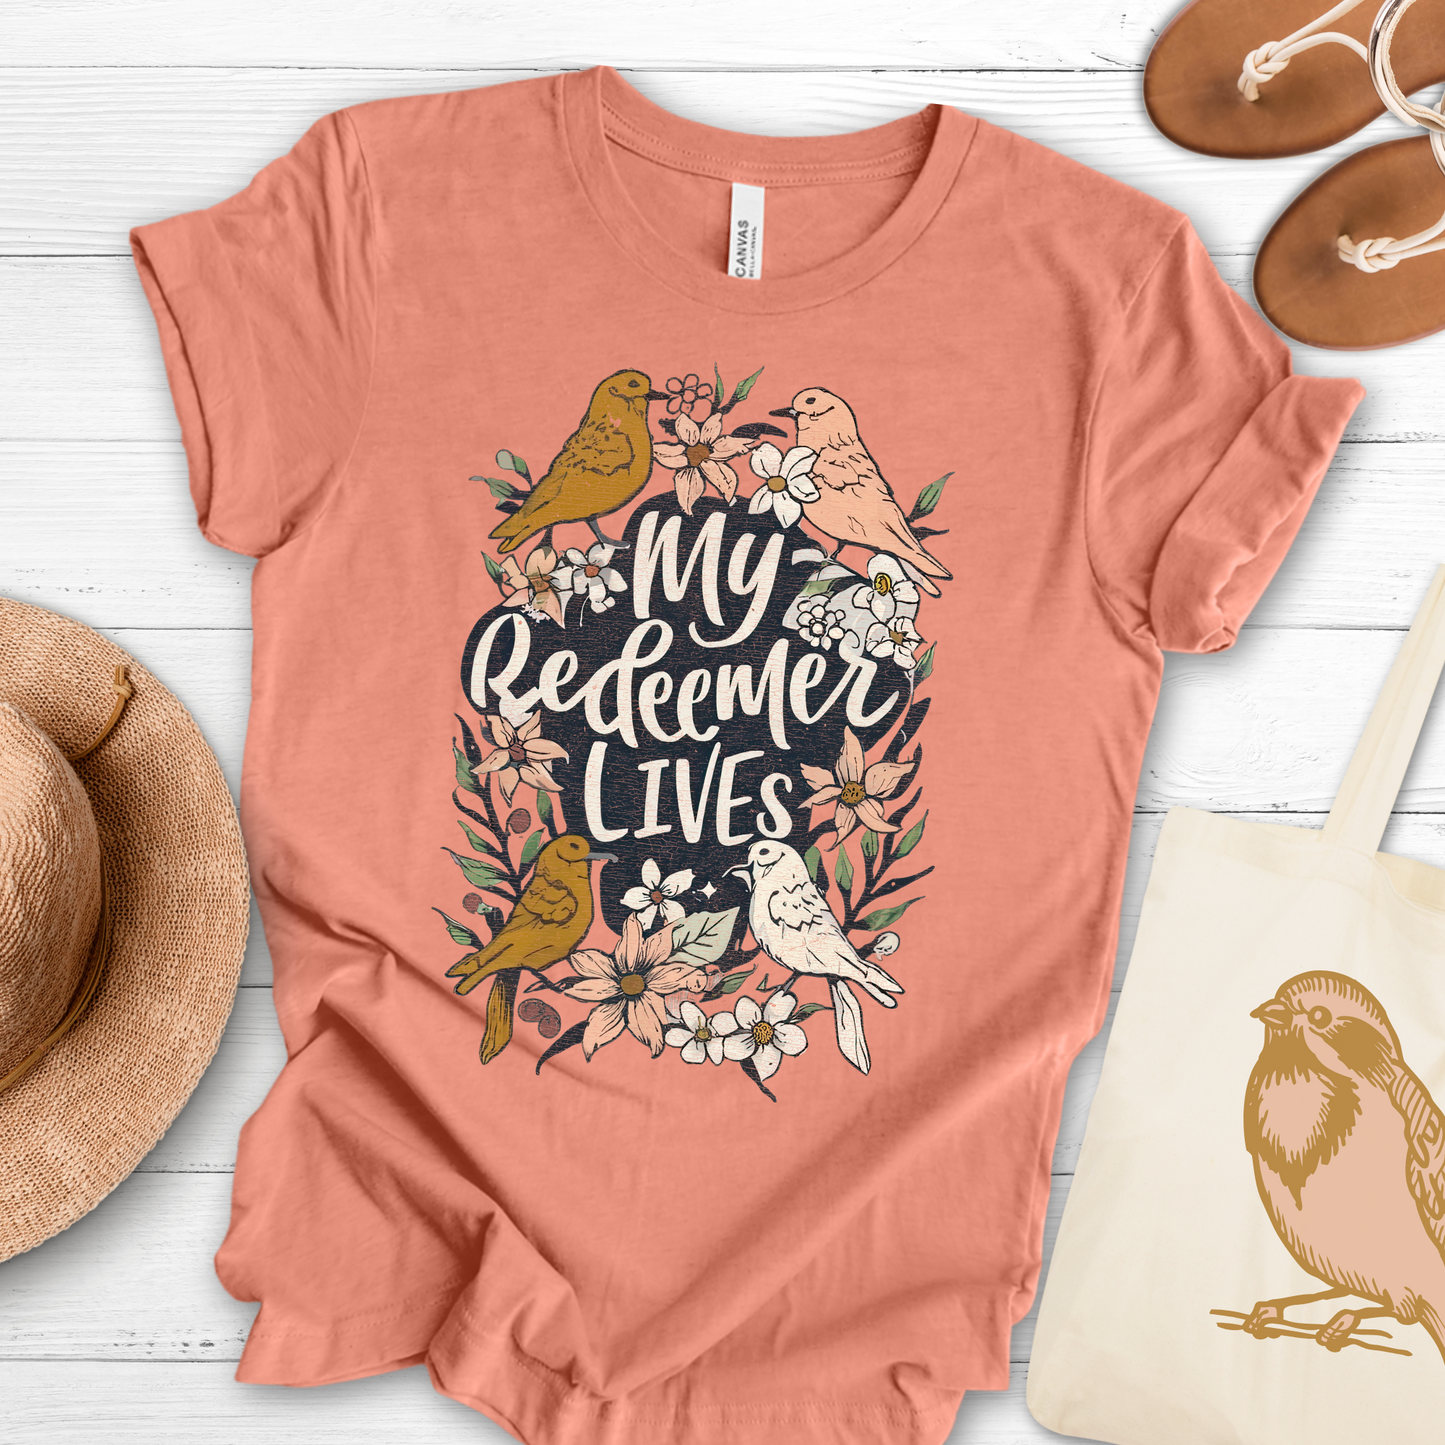 My redeemer lives tee - Additional Colors